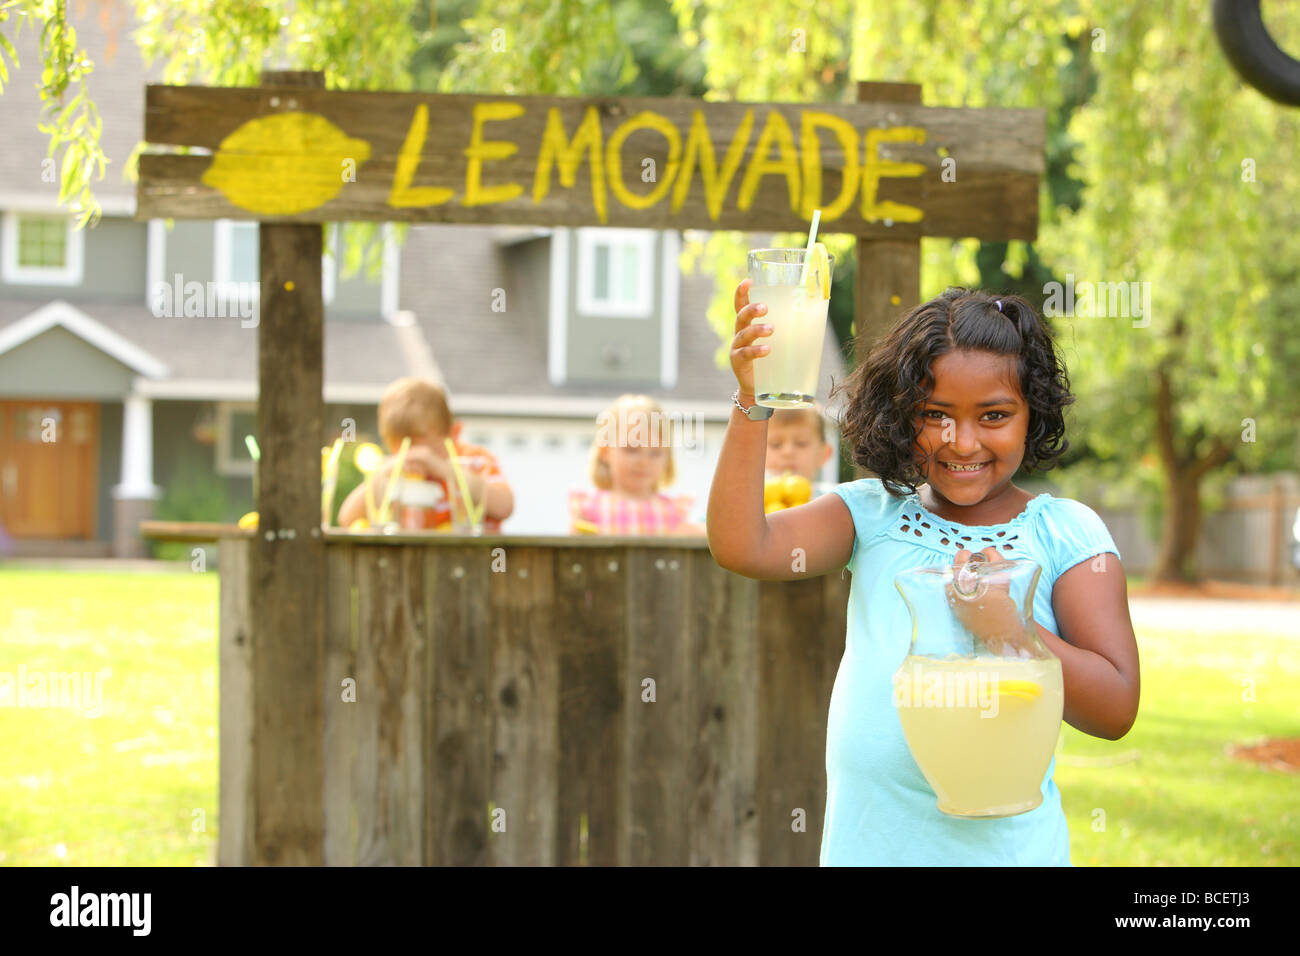 Young girl in front of lemonade stand Stock Photo